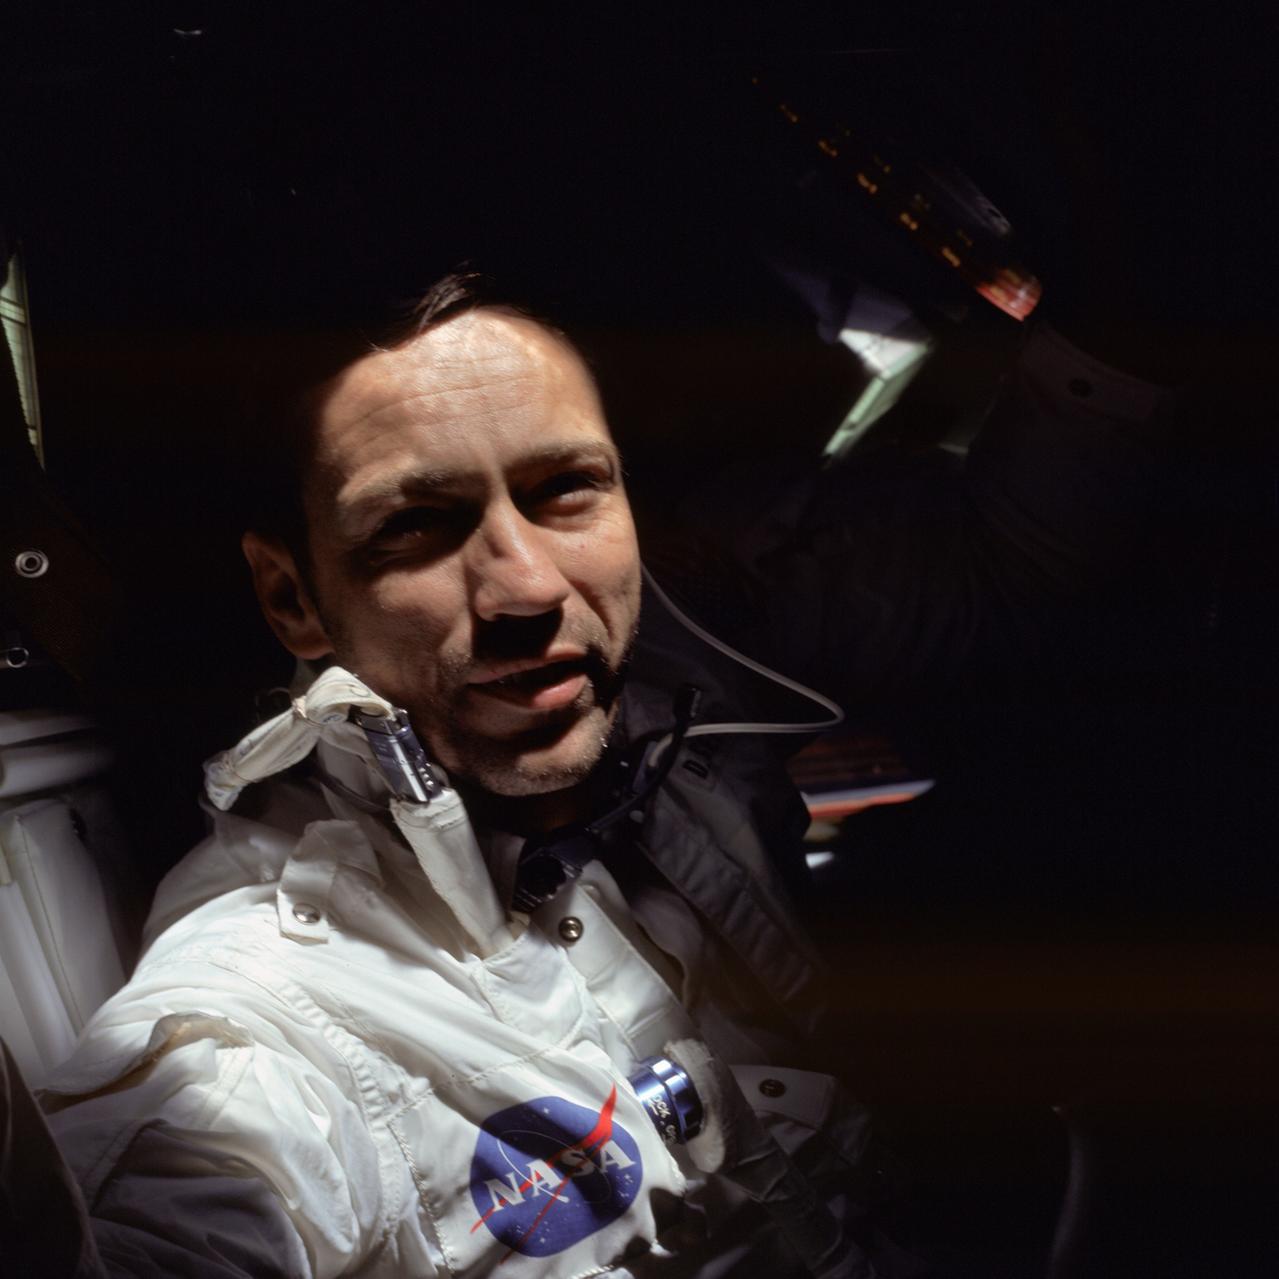 Astronaut Donn F. Eisele, Apollo 7 command pilot, is photographed during the Apollo 7 mission.